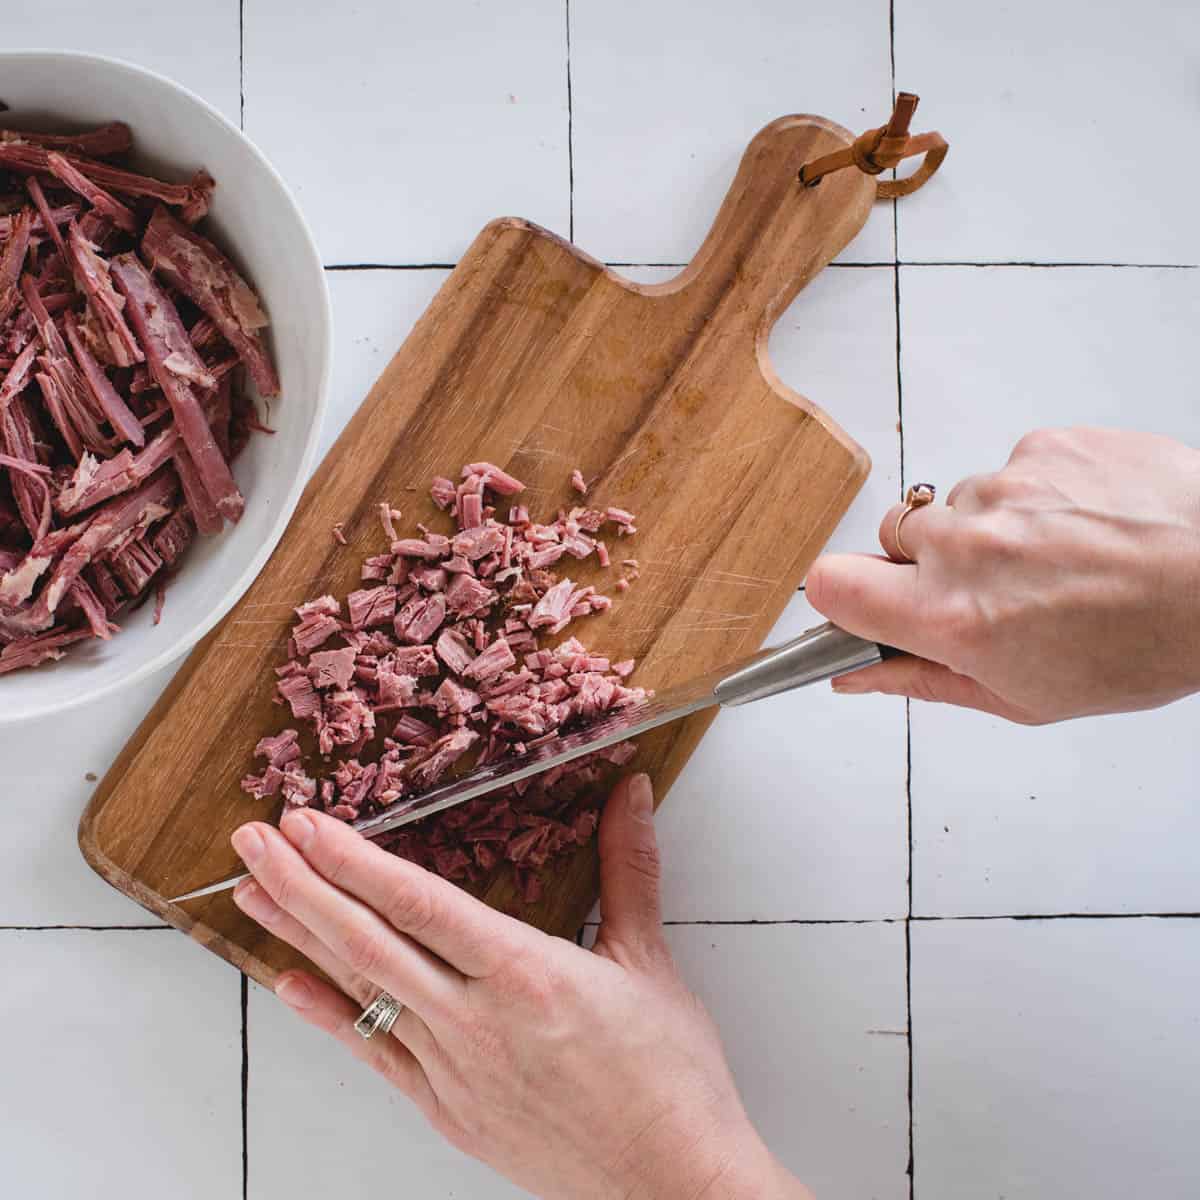 Corned beef being chopped into pieces